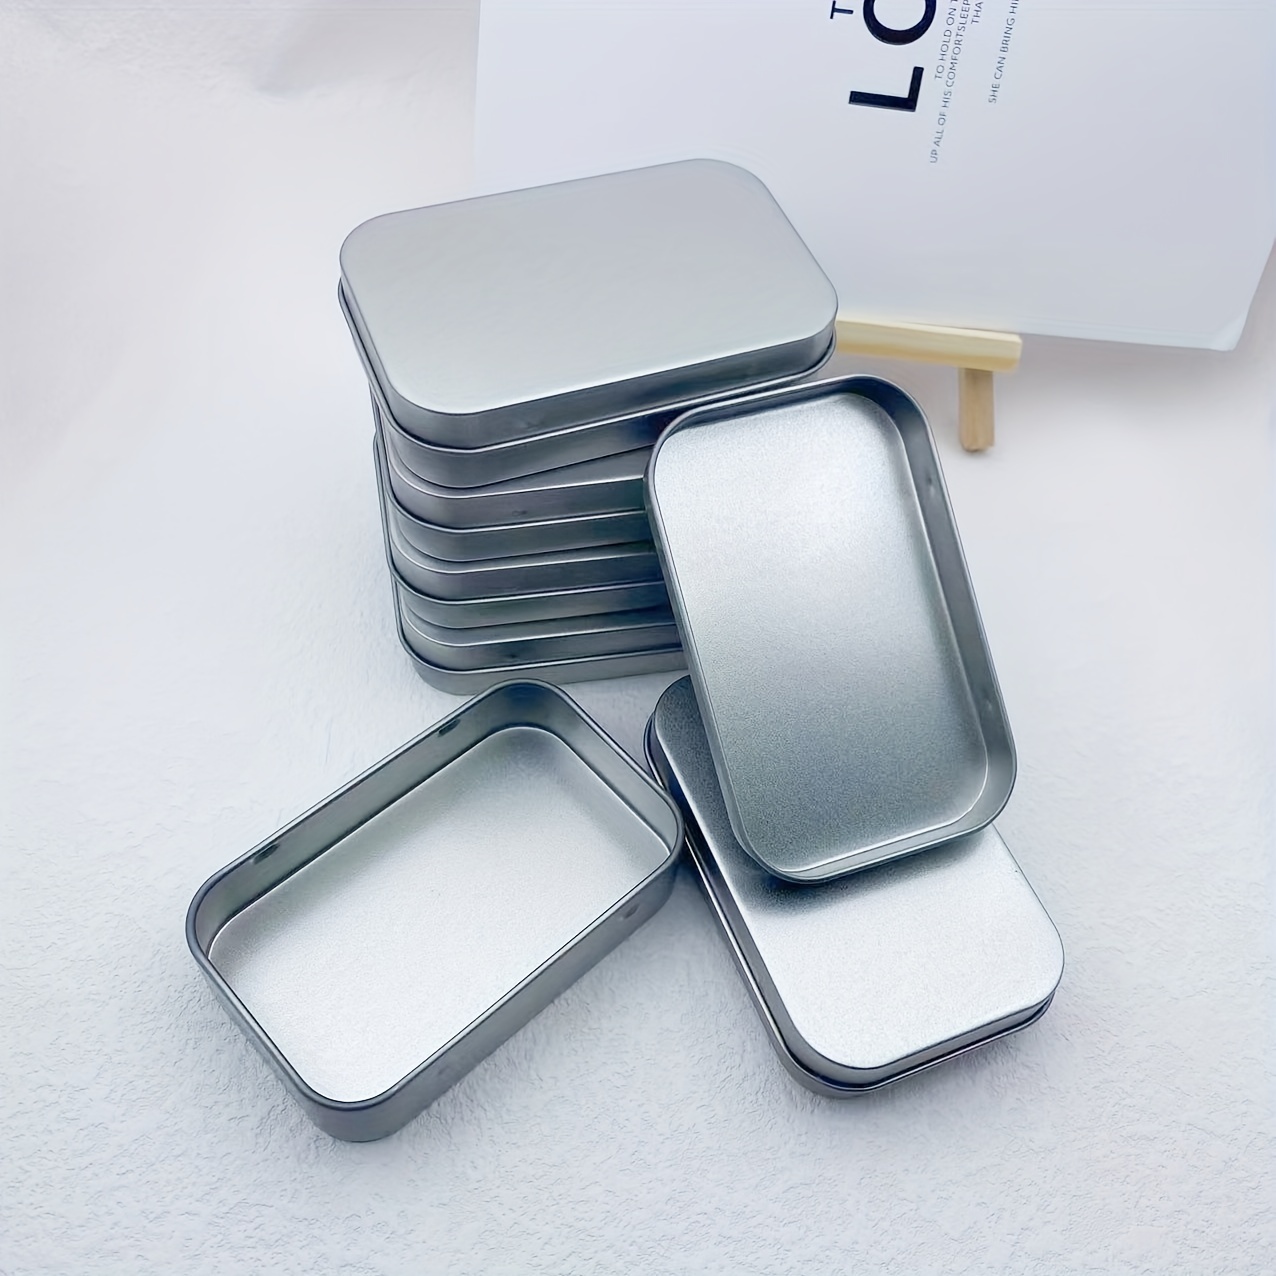 4pcs Hinged Jewelry Metal Tin Small Tin Box Craft Containers For Organizing